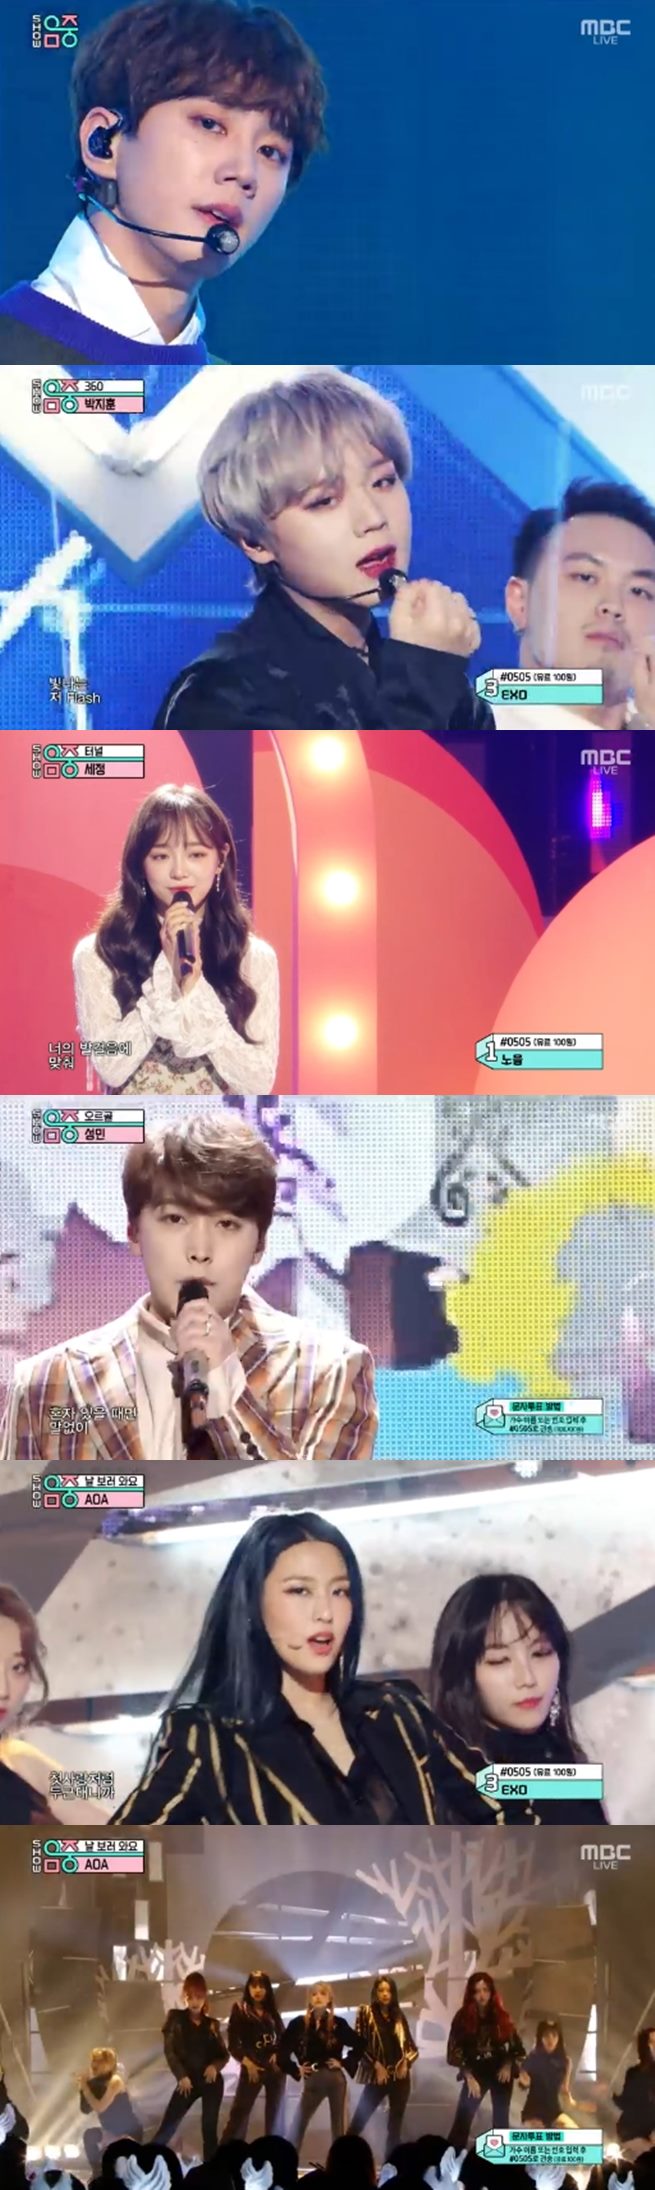 EXO beat IU, Noel to take first-place trophyEXO ranked first in MBC Show! Show! Music Core broadcast on the 7th.Noel s late night in the alleyway in front of your house, IU Blueming and EXO Obsession While Noel and IU did not appear, EXO made a comeback stage with Obsession.Obsession is the title song of an addictive hip-hop dance genre. EXO members showed intense stage with black color costumes.Performance, which cannot be taken away, was also impressive.As a result, the top trophy was EXOs. EXO attracted attention by leaving the impression that Gyeongsu and Minseok, who seem to be watching this, love EXO D.O. and Xiumin.I could see a colorful comeback stage. Sungmin performed a solo comeback stage with Orgol, and Musey was like Someone else and Do not you reconcile now?And caught the attention with two charms. Lee Jun-young announced his solo debut on the stage of Im curious .In addition, the former singer Se-jeong was on stage as a solo singer and showed off his vocal skills through Tunnel. Park Ji-hoon from Wanna One showed intense performance with 360.He also played a special MC on the show. AOA showed a girl crush charisma through Come to see me.In addition, Show! Music Core appeared on the day, including Kim Jang-hoon, Astro, Golden Child, Nature, New Kid, and One-on-One.Photo = MBC Broadcasting Screen